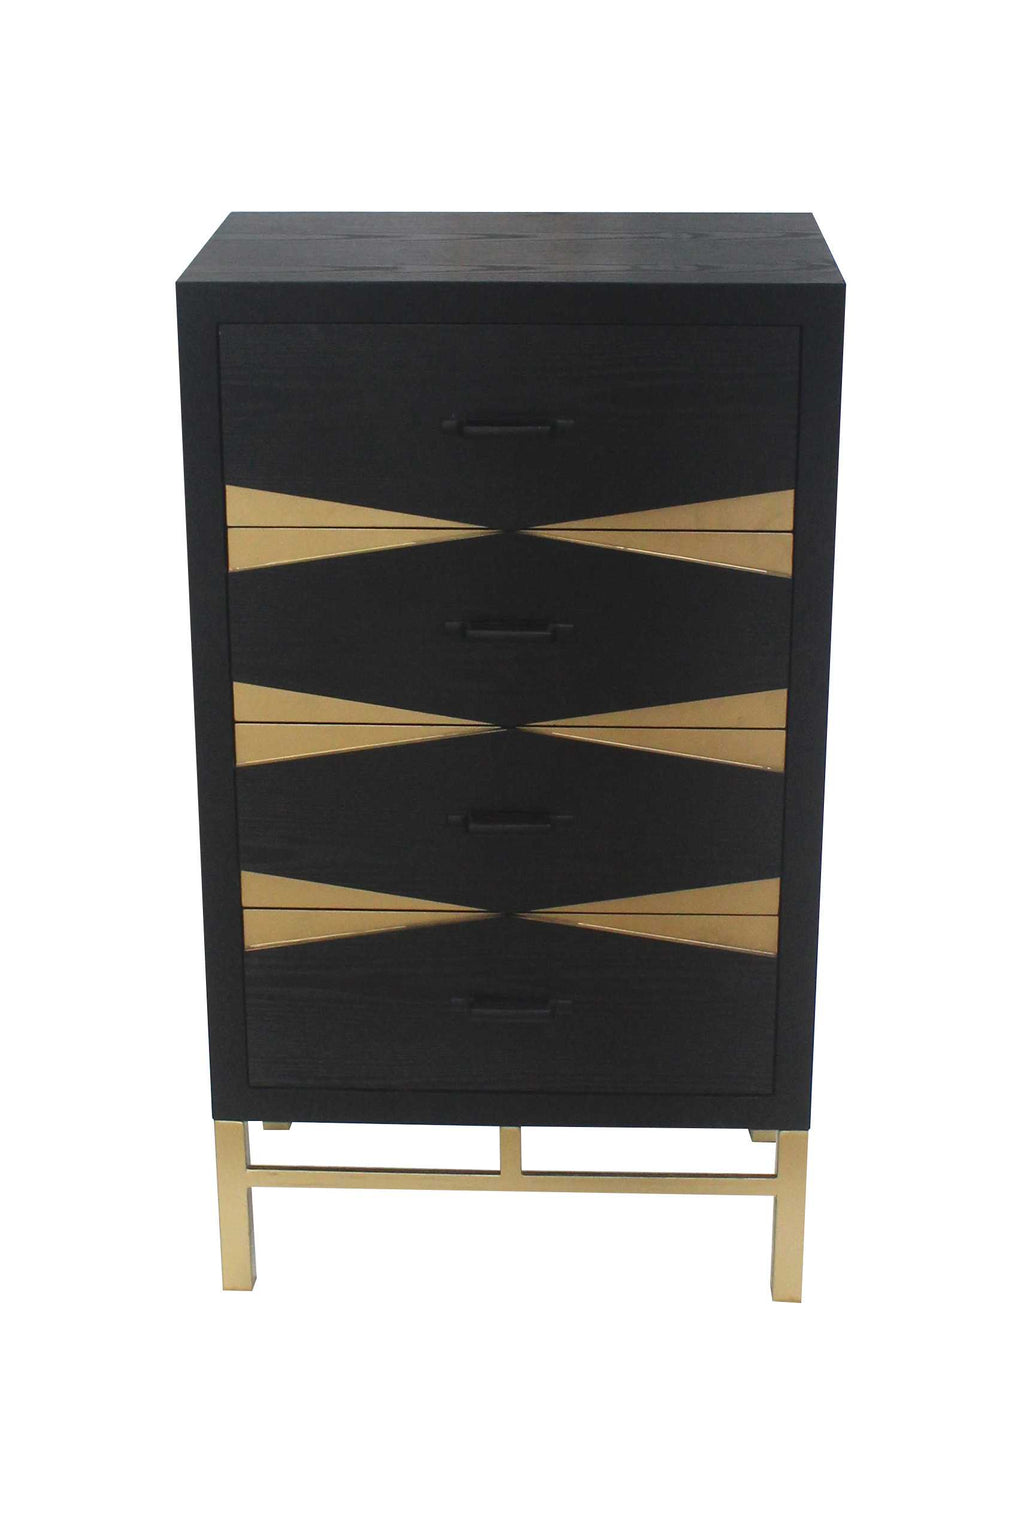 40" X 14" X 23" Black & Gold 4 Drawer Side Table